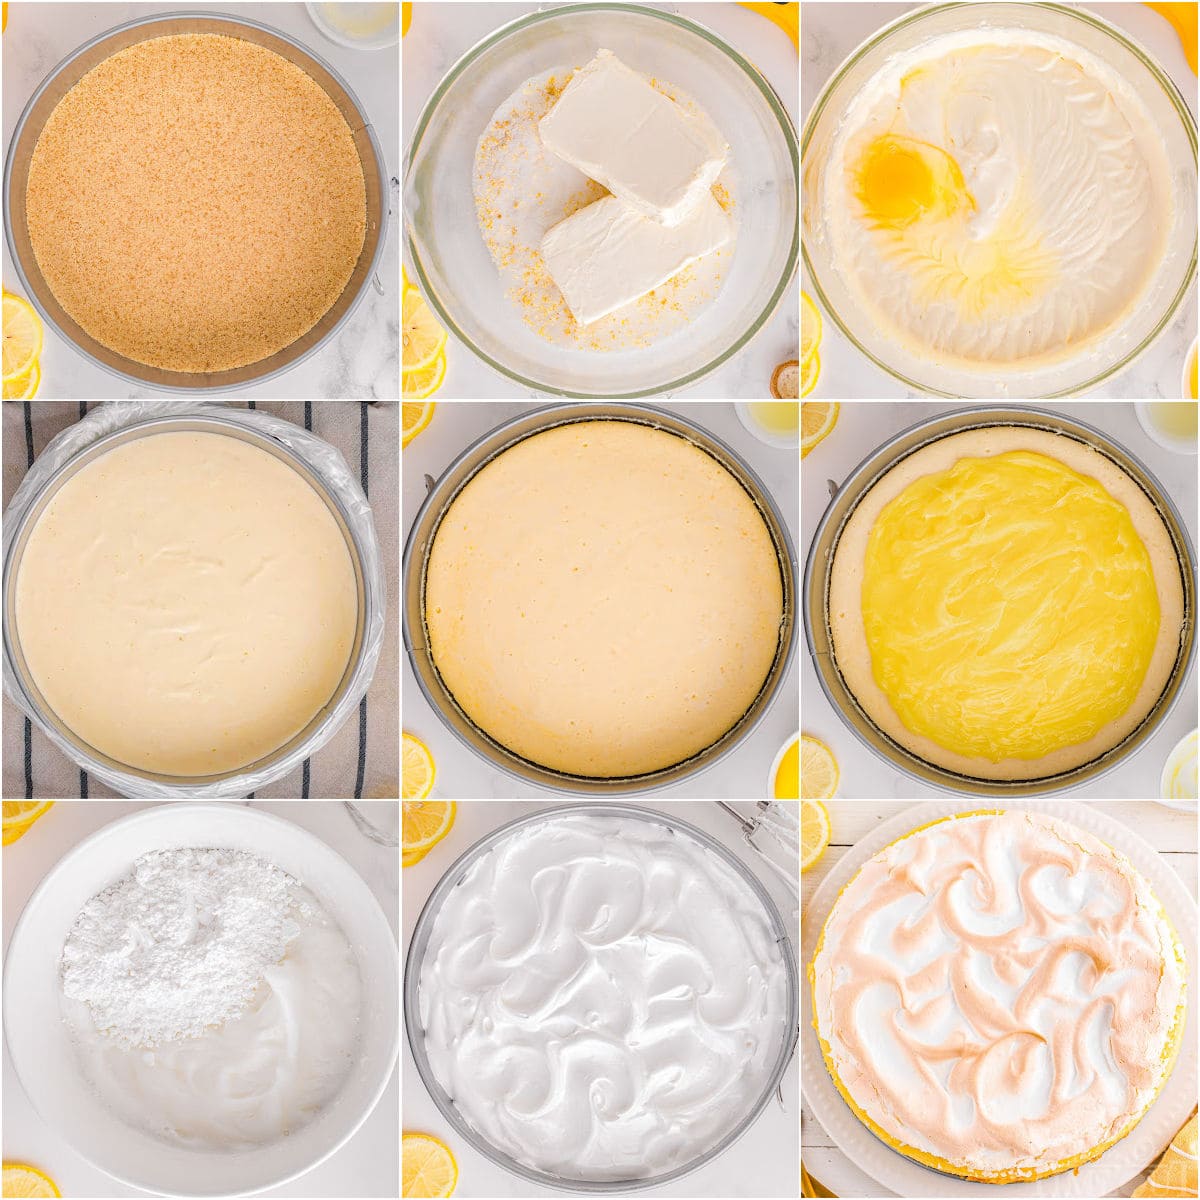 nine image collage showing how to make the lemon meringue cheesecake step by step.